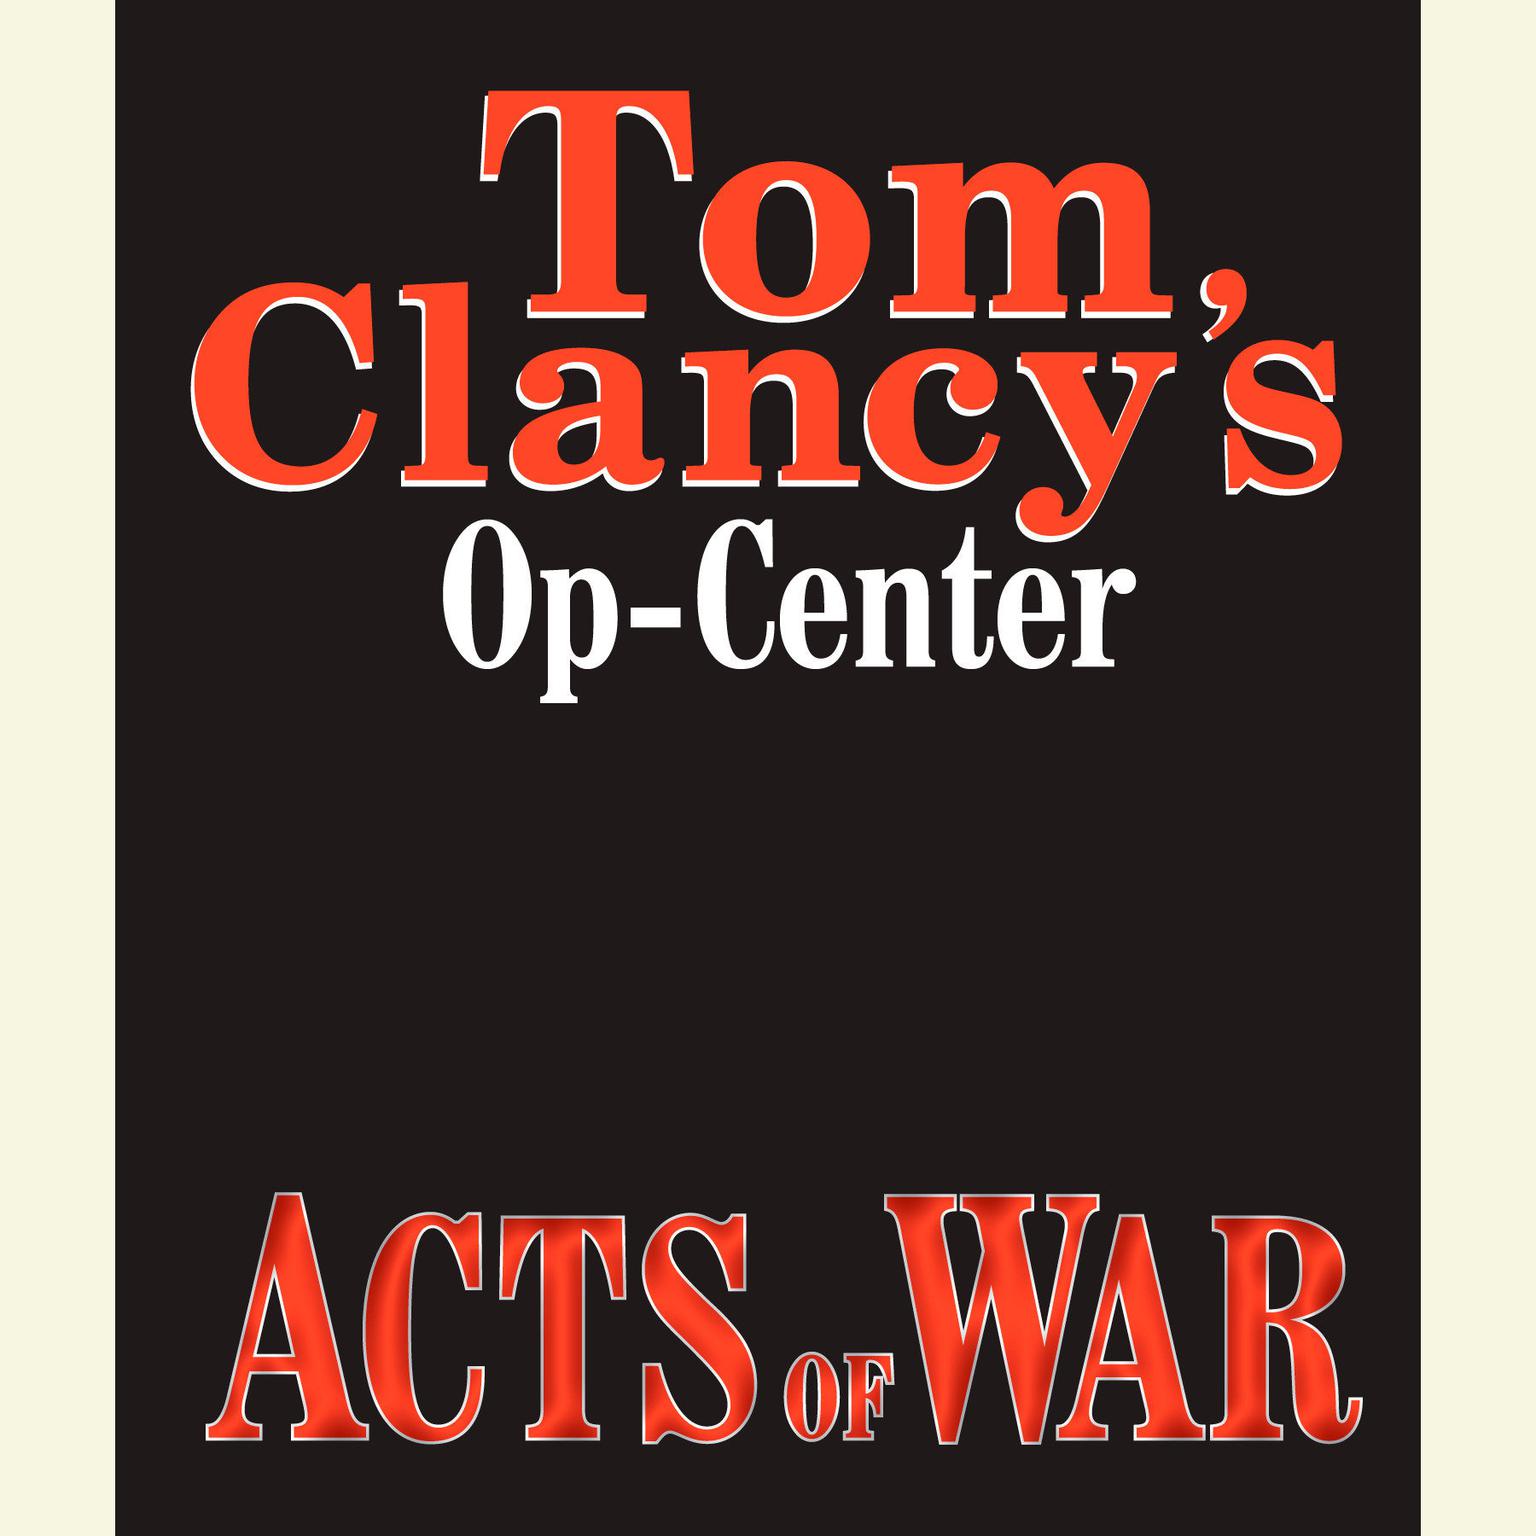 Tom Clancys Op-Center #4: Acts of War Audiobook, by Jeff Rovin